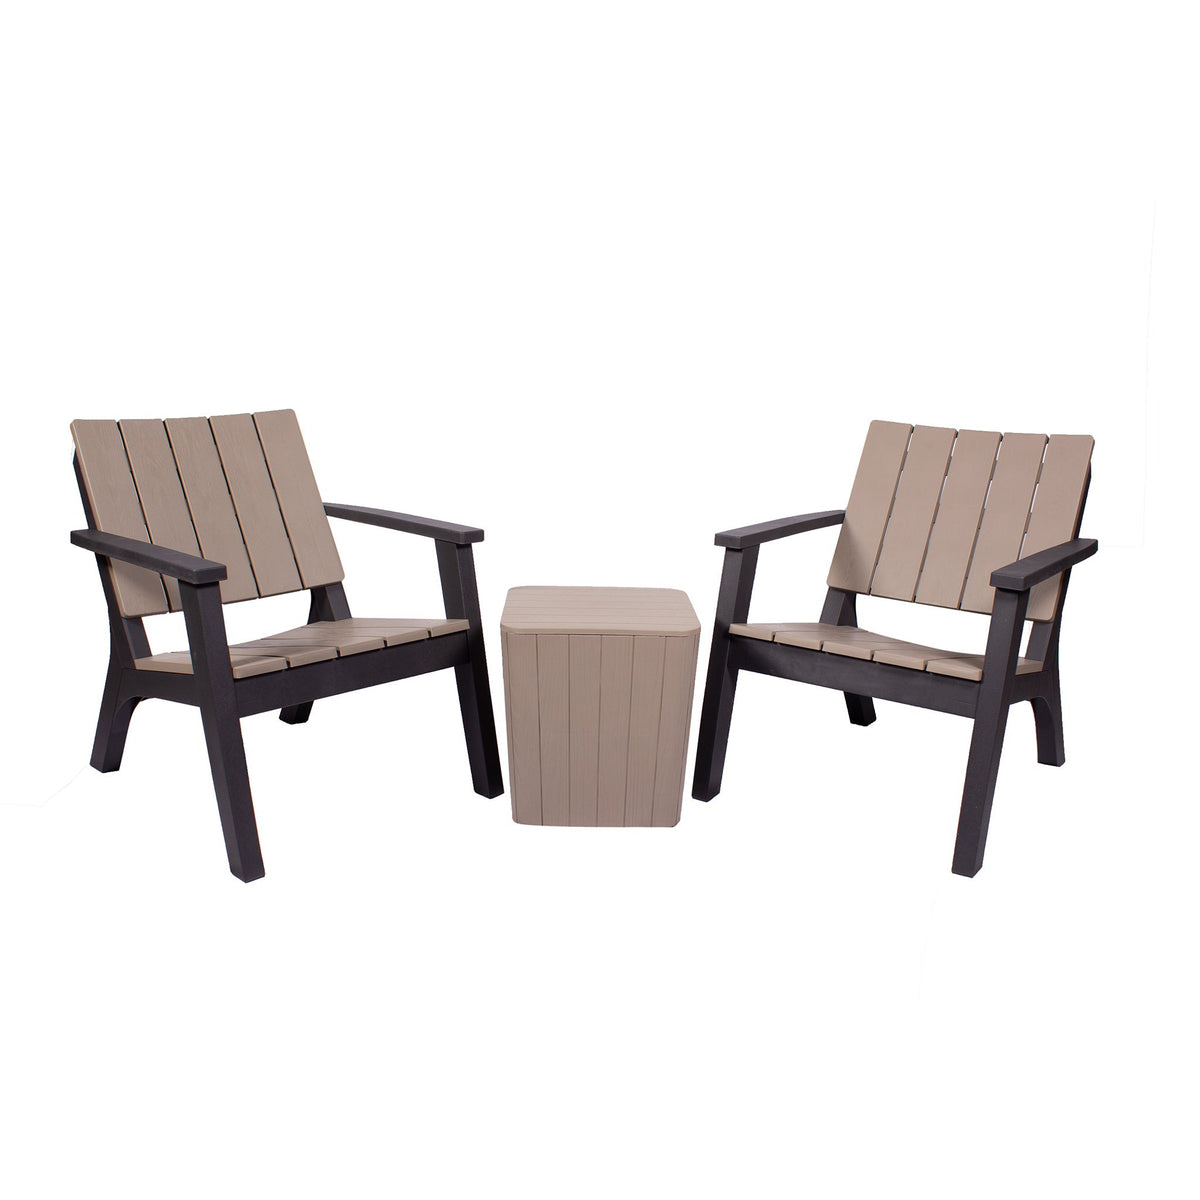 Faro 2 Seater Bistro Set with Coffee Table from Roseland Home Furniture